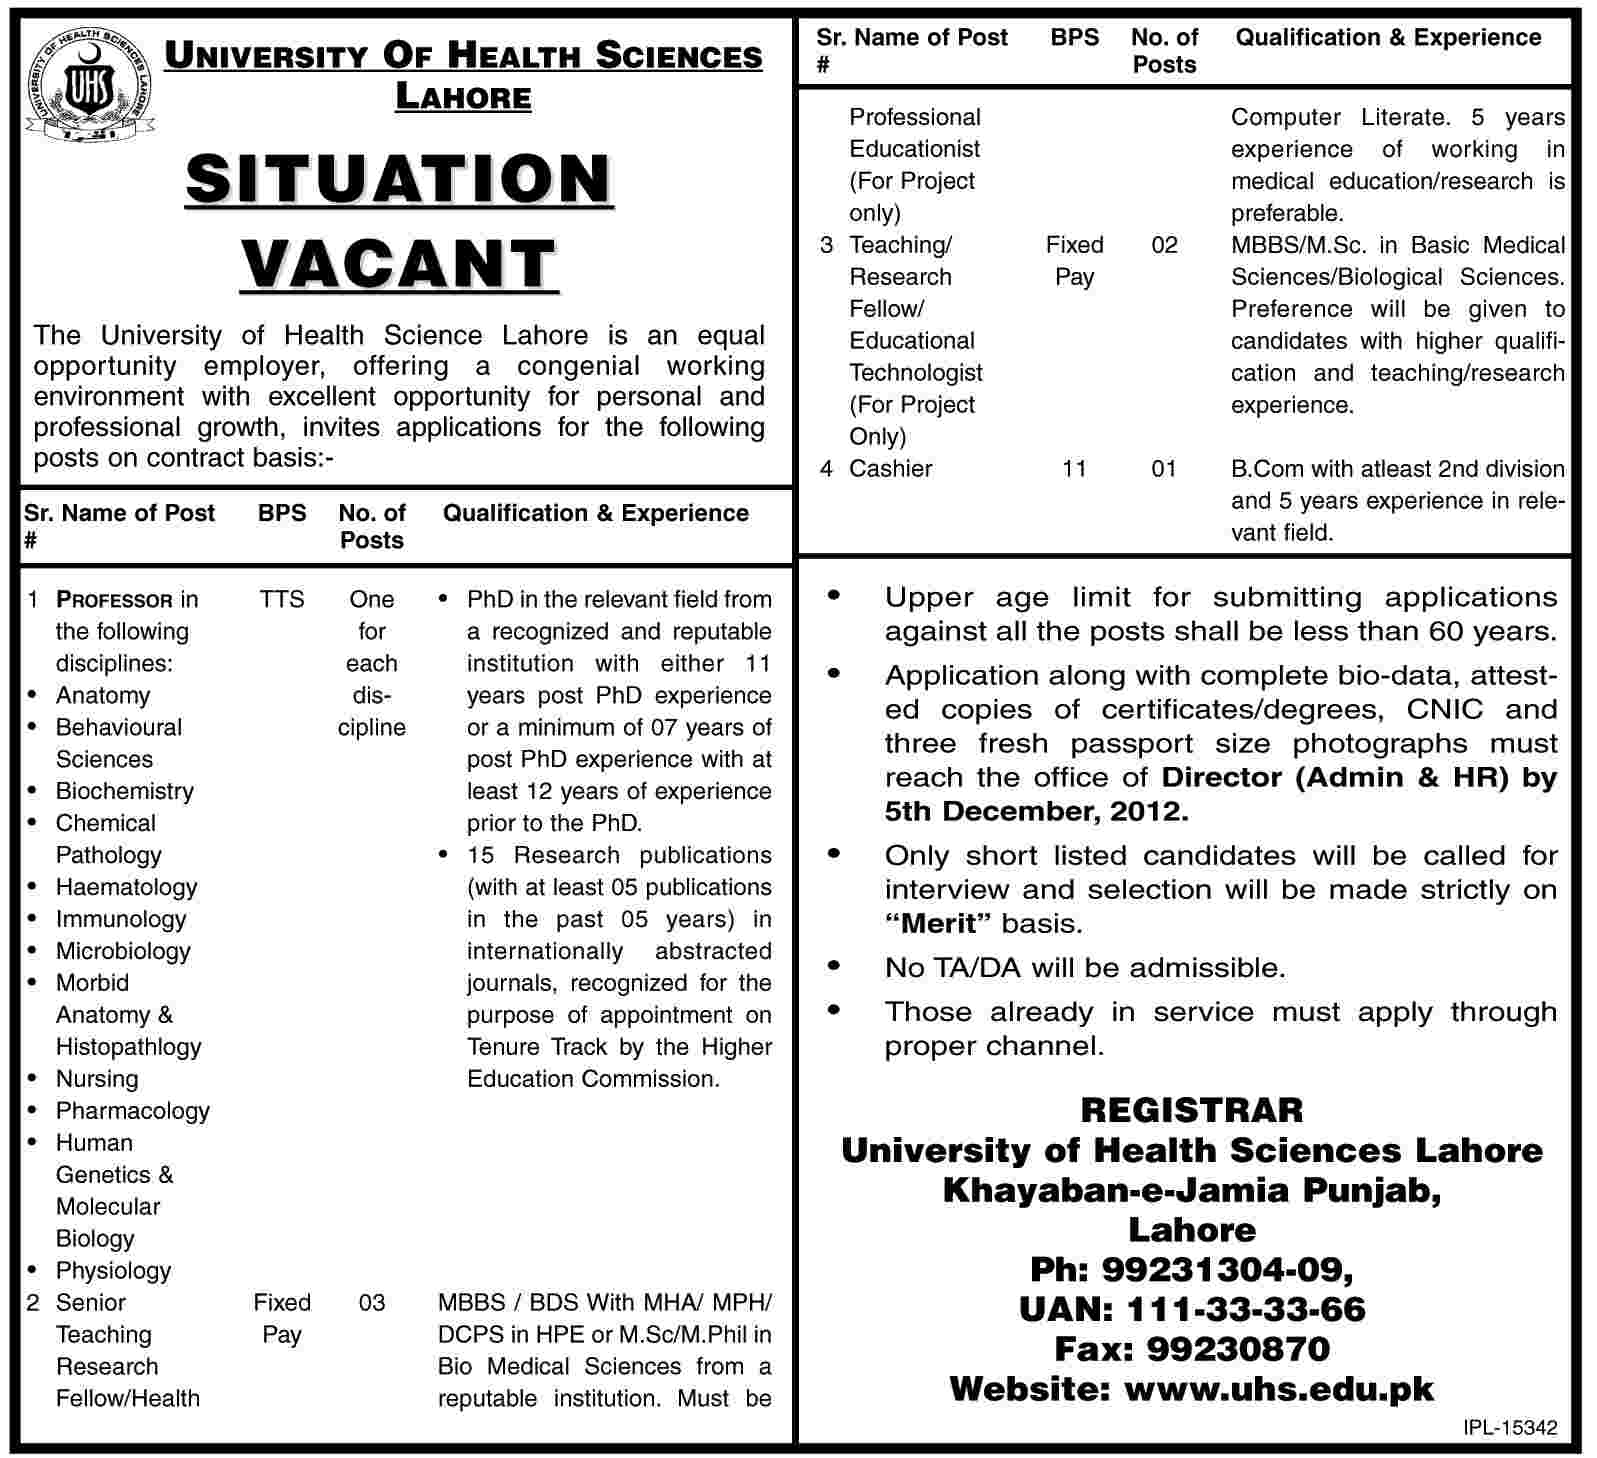 UHS Lahore Jobs 2012 for Medical Professors, Research Fellows & Cashier